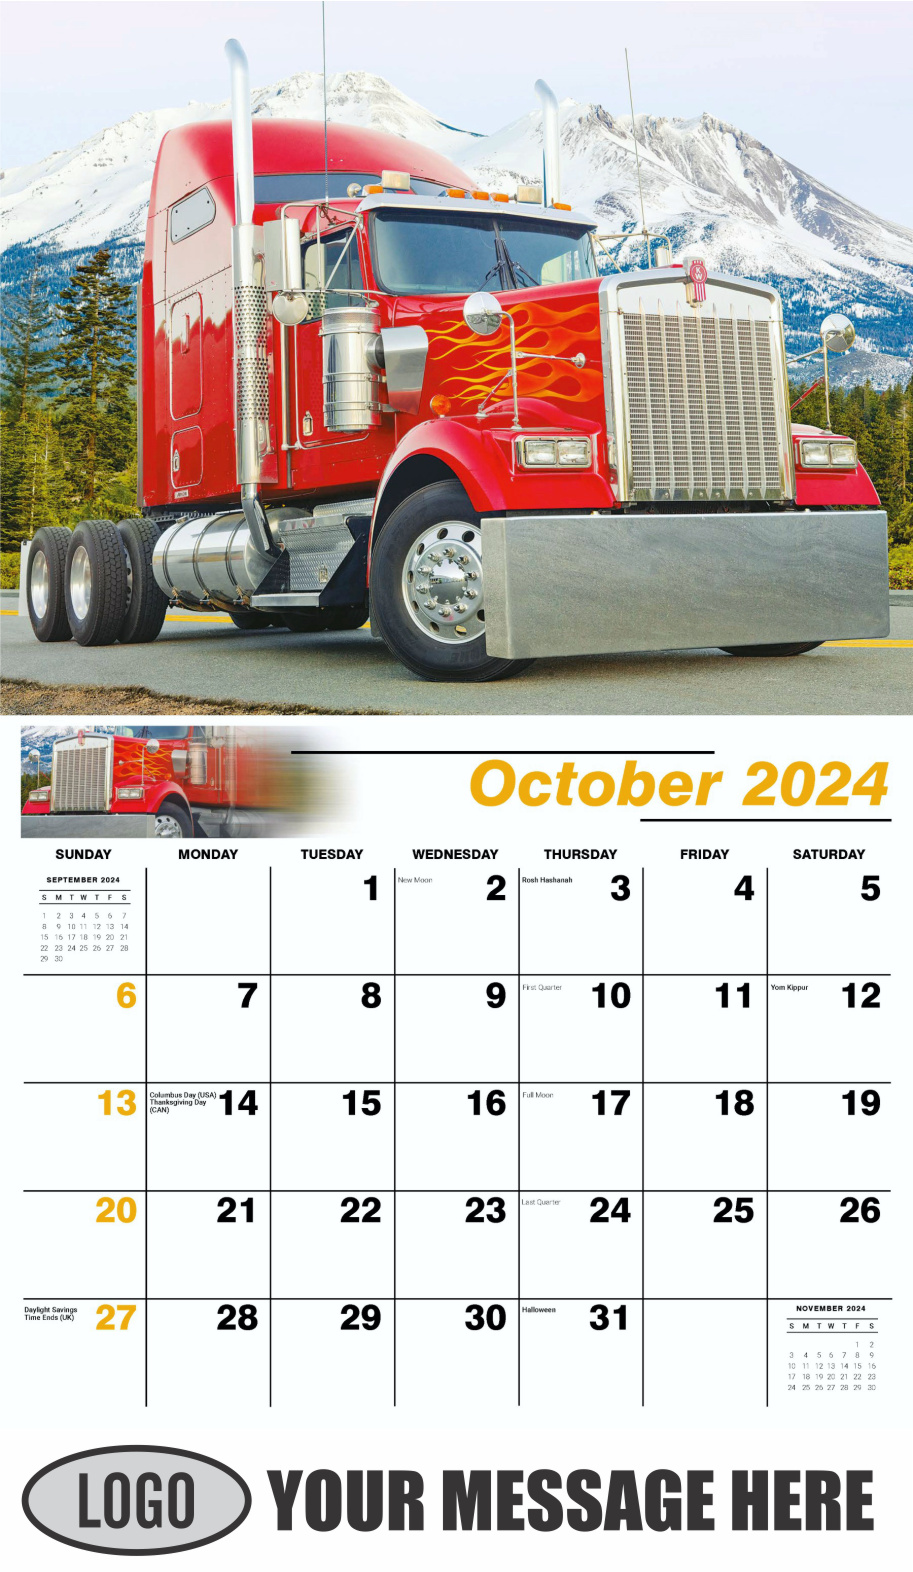 Kings of the Road 2024 Automotive Business Promotional Calendar - October